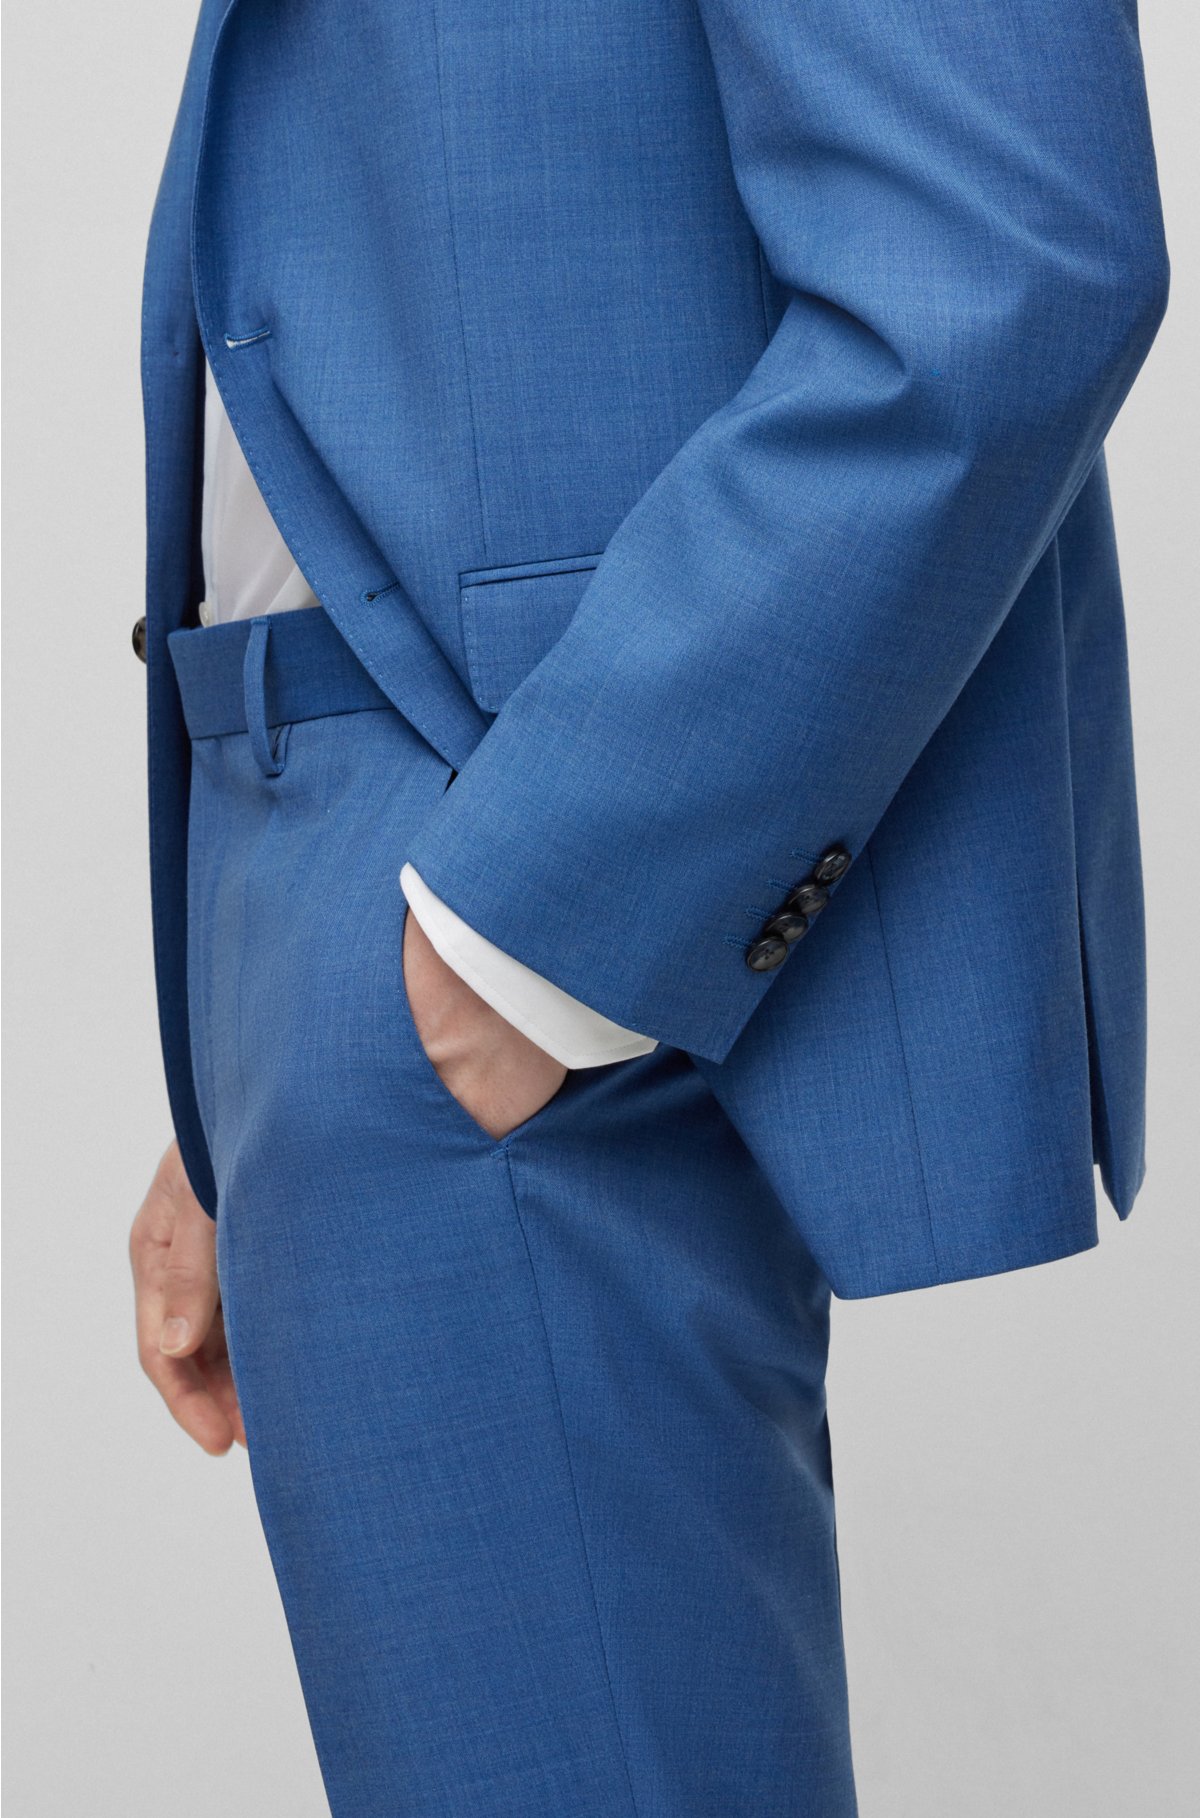 BOSS - Regular-fit suit in virgin wool with full lining